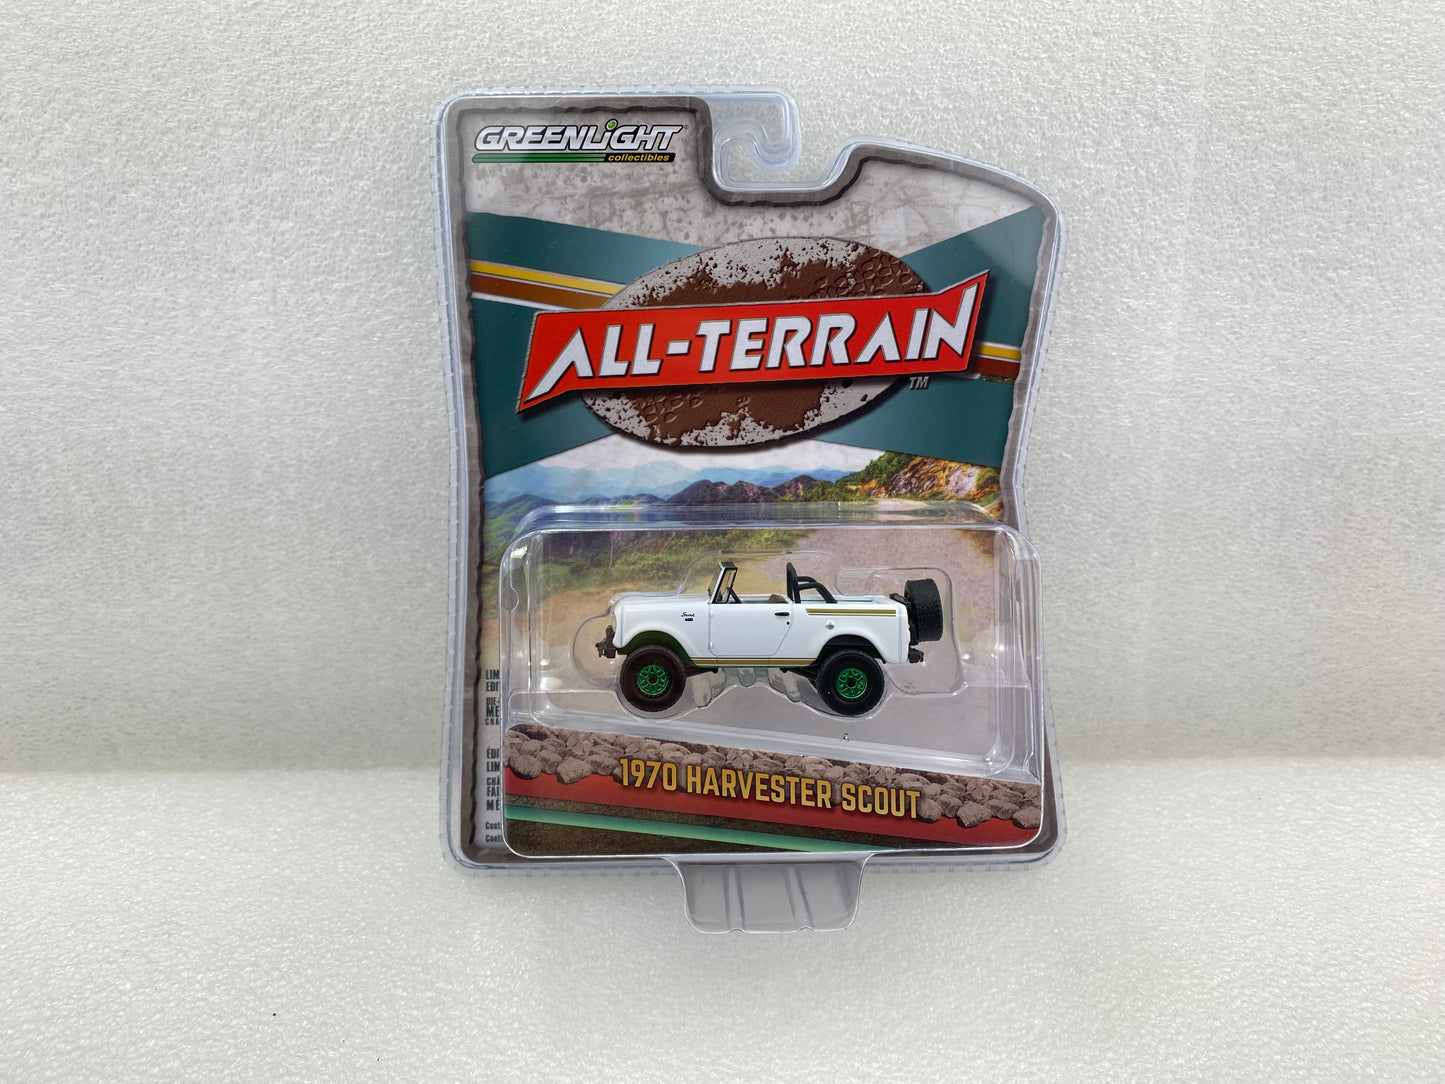 GreenLight Green Machine 1:64 All-Terrain Series 15 - 1970 Harvester Scout Lifted with Off-Road Parts - White and Gold 35270-B